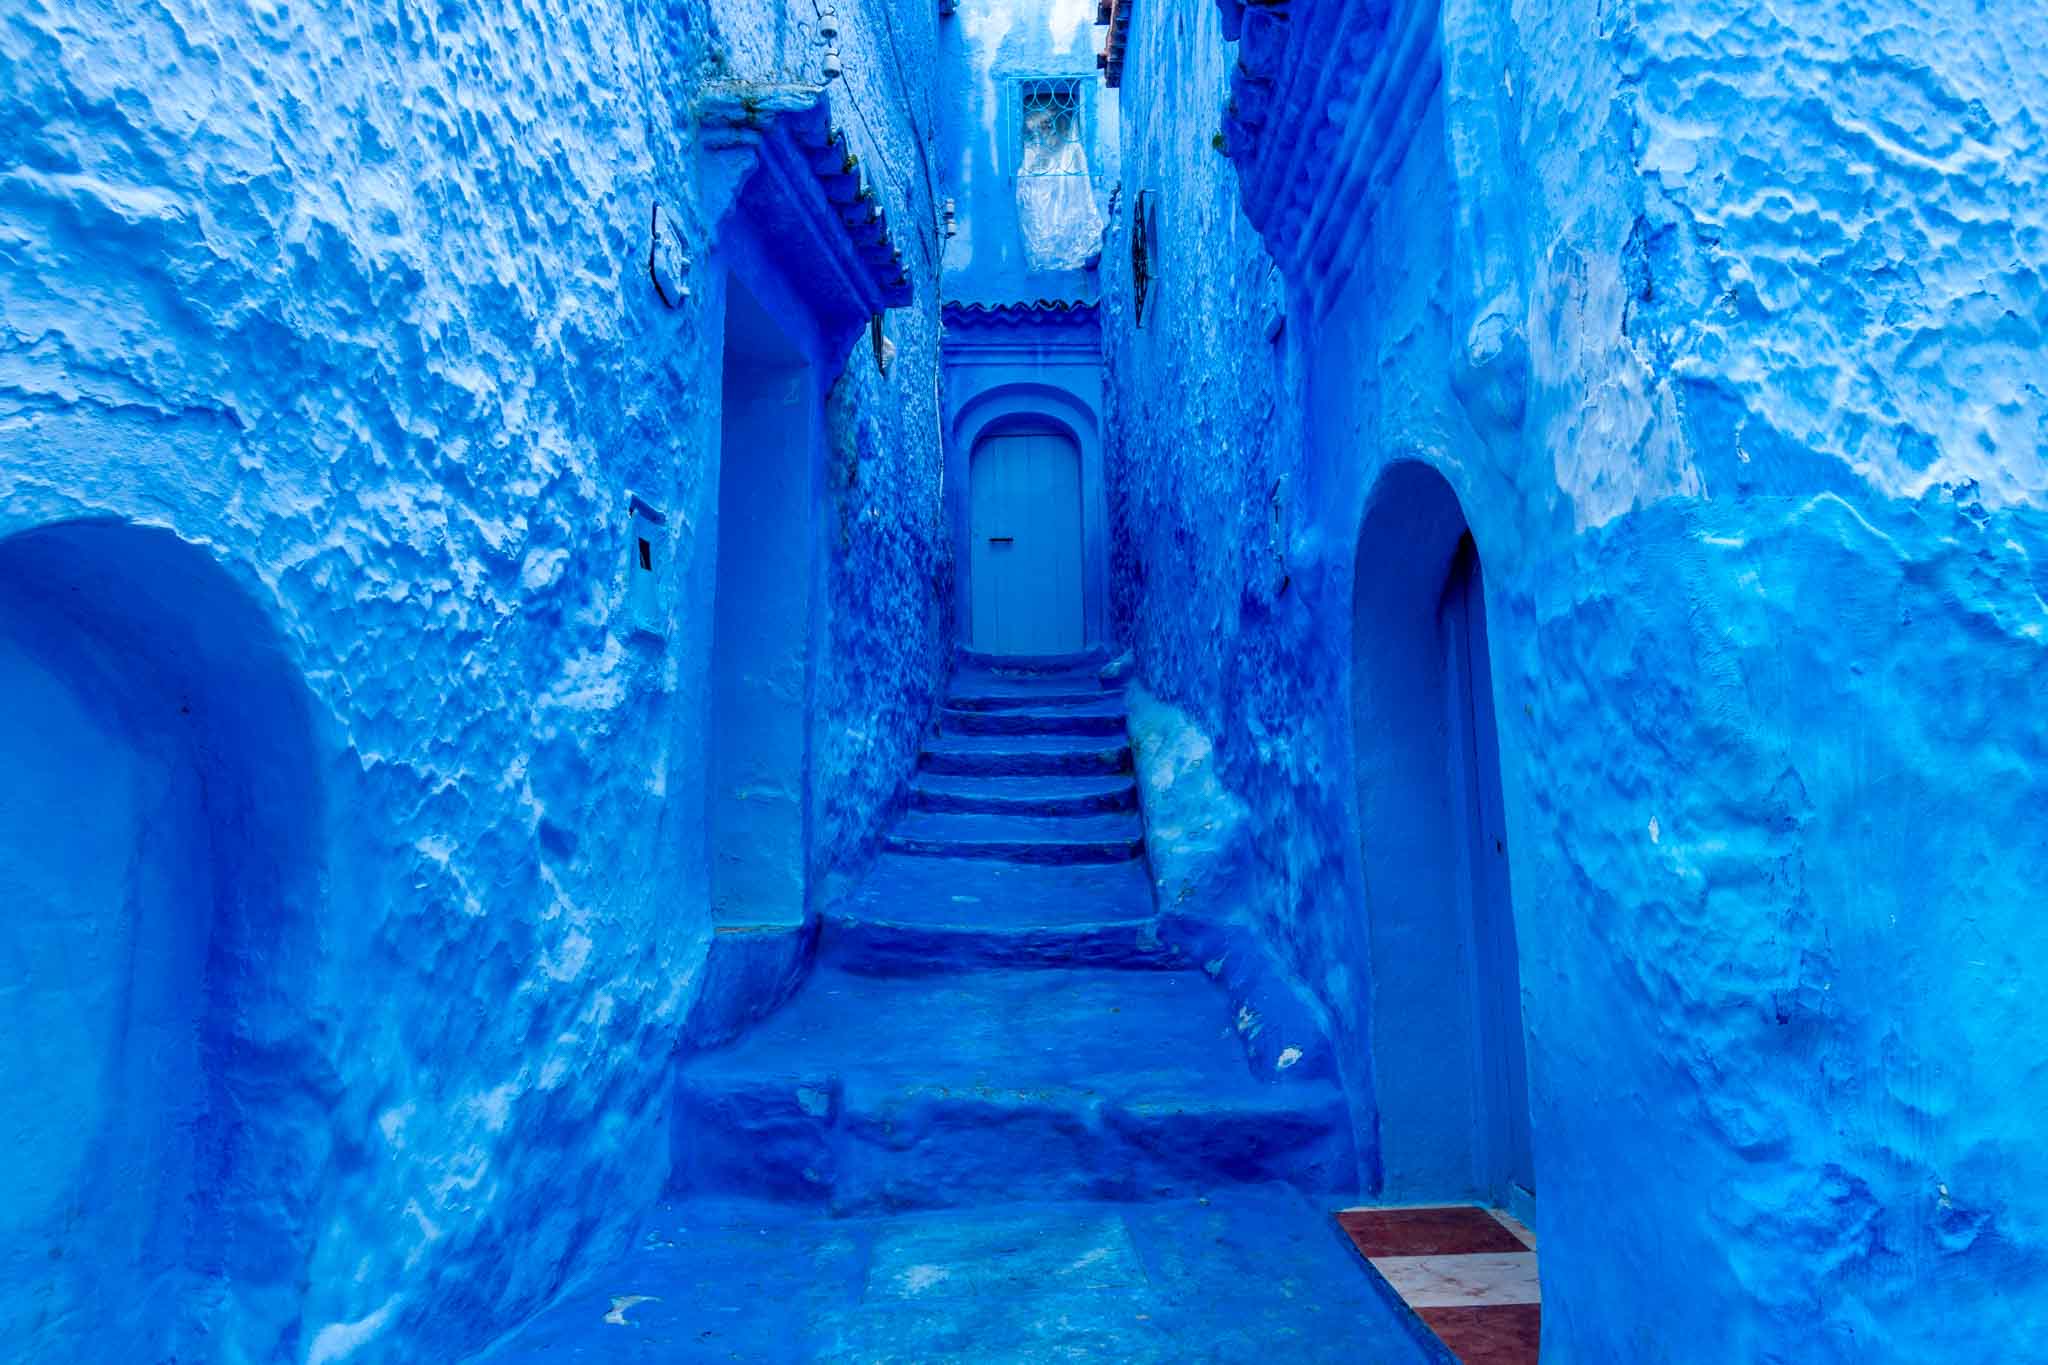 Doorway in the blue city Chefchaouen Morocco.